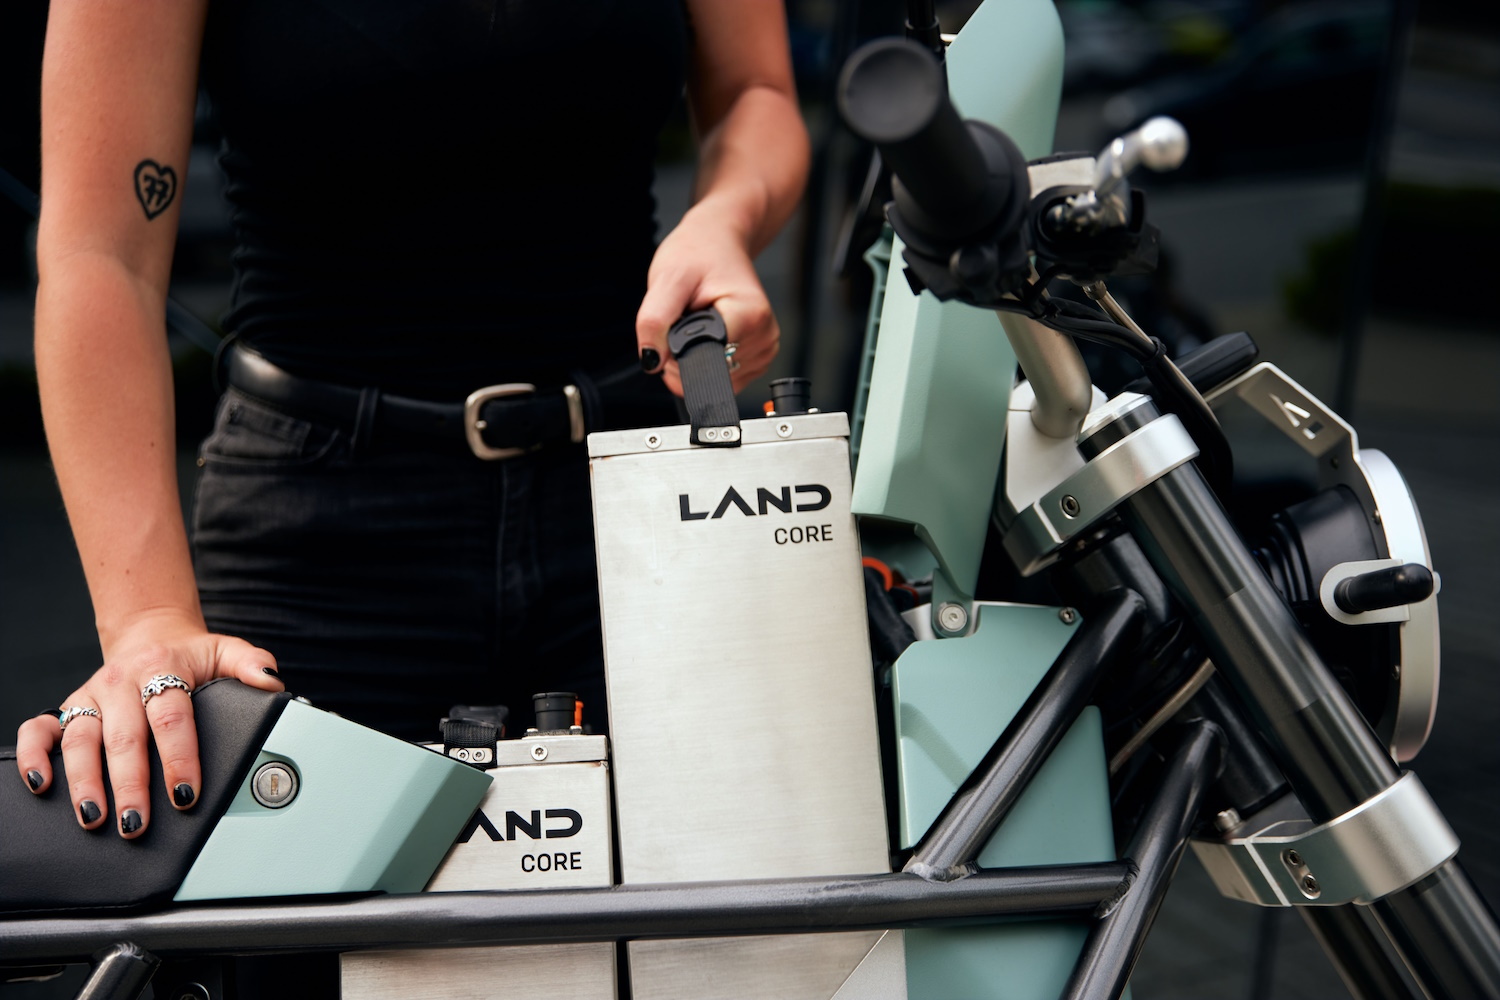 Land Moto accelerates its electric bike battery play with $3M infusion